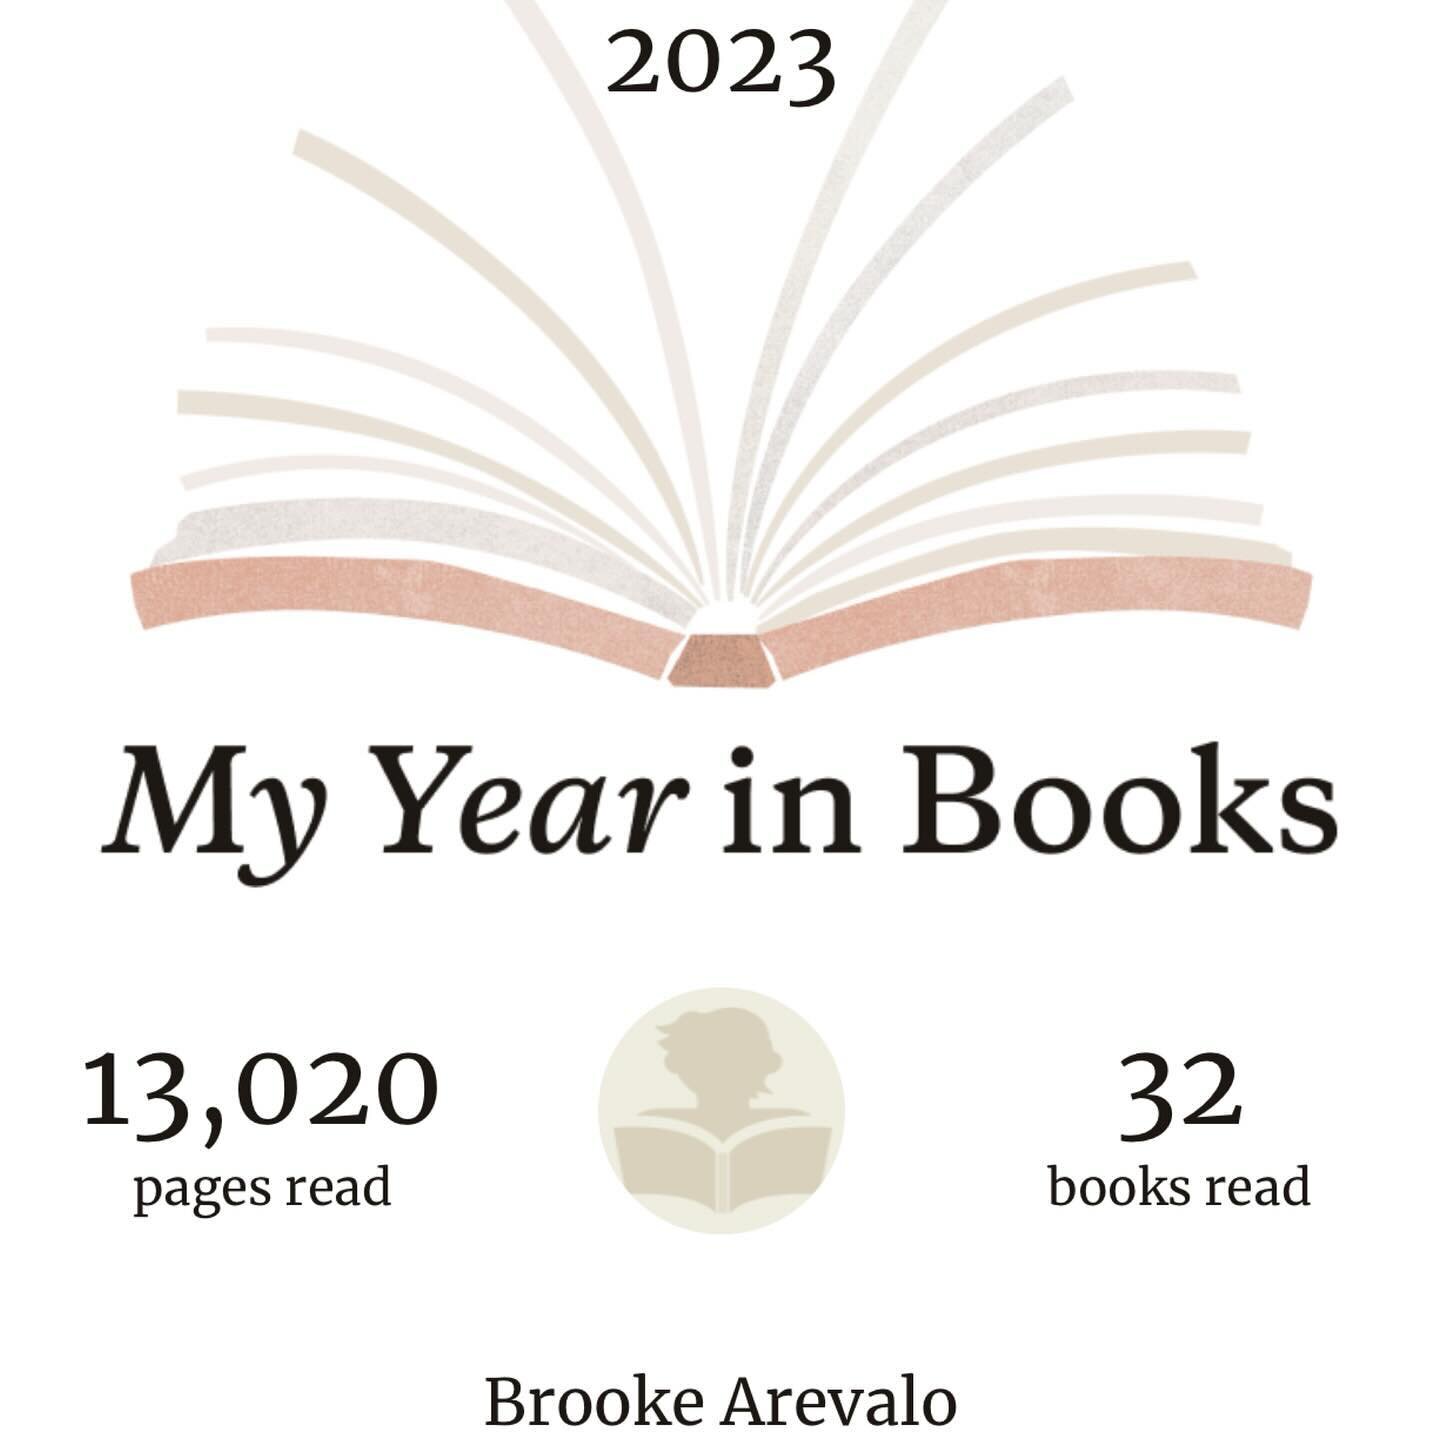 2023 in books! My fave thing this year was reading books with Ron (we read 8 together!) I also started reading more books at once, so then I could pretty much always be in the mood to read something!
My top books from the year are Fourth Wing, A Hear